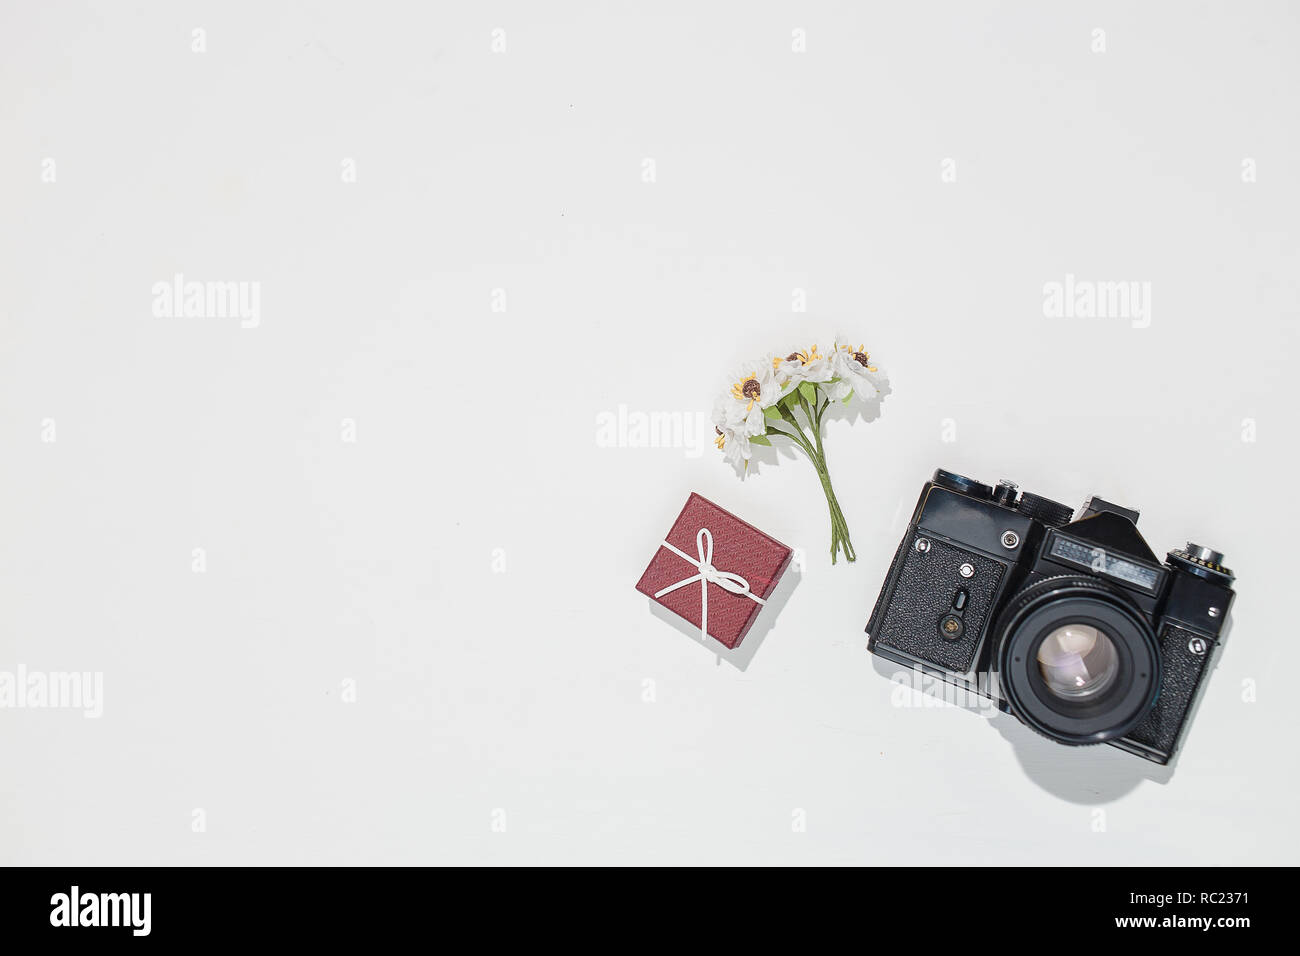 Minimalistic flat lay composition with retro camera, vinous gift box and spring field flower on white background. Trendy flat lay mockup for bloggers, designers, photographers, etc. Stock Photo